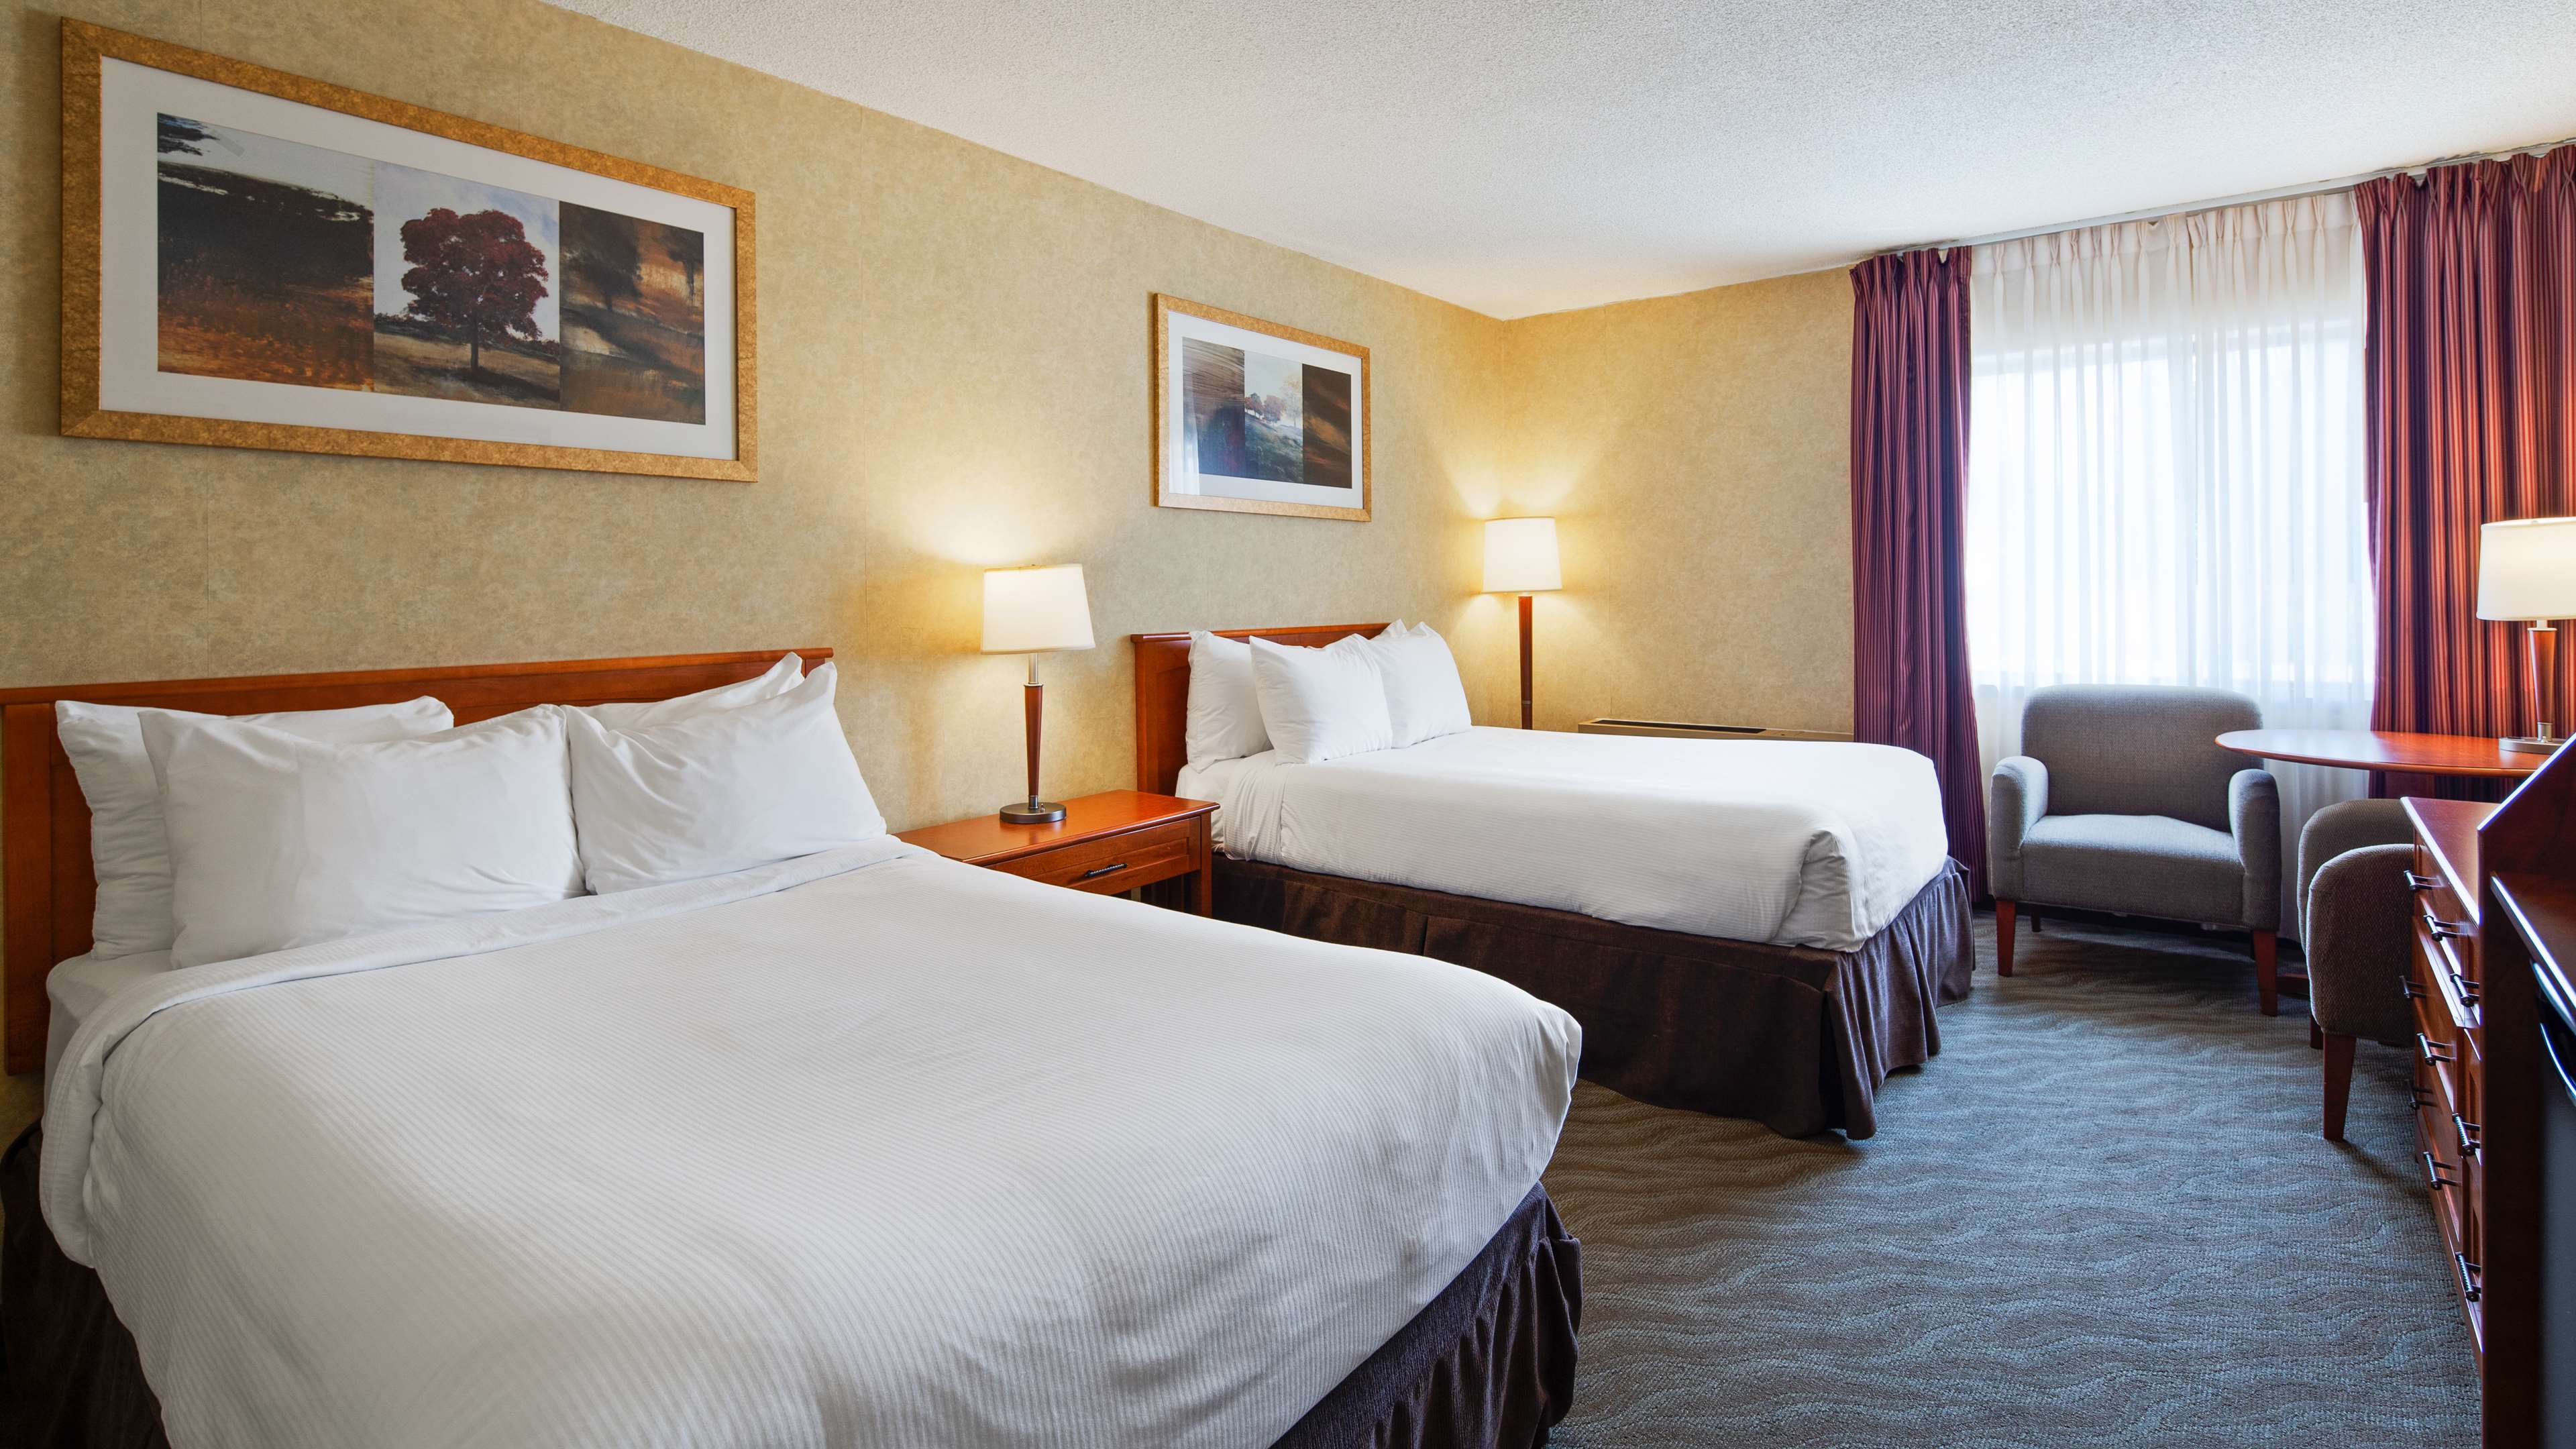 Double Bed Guest Room Best Western North Bay Hotel & Conference Centre North Bay (705)474-5800